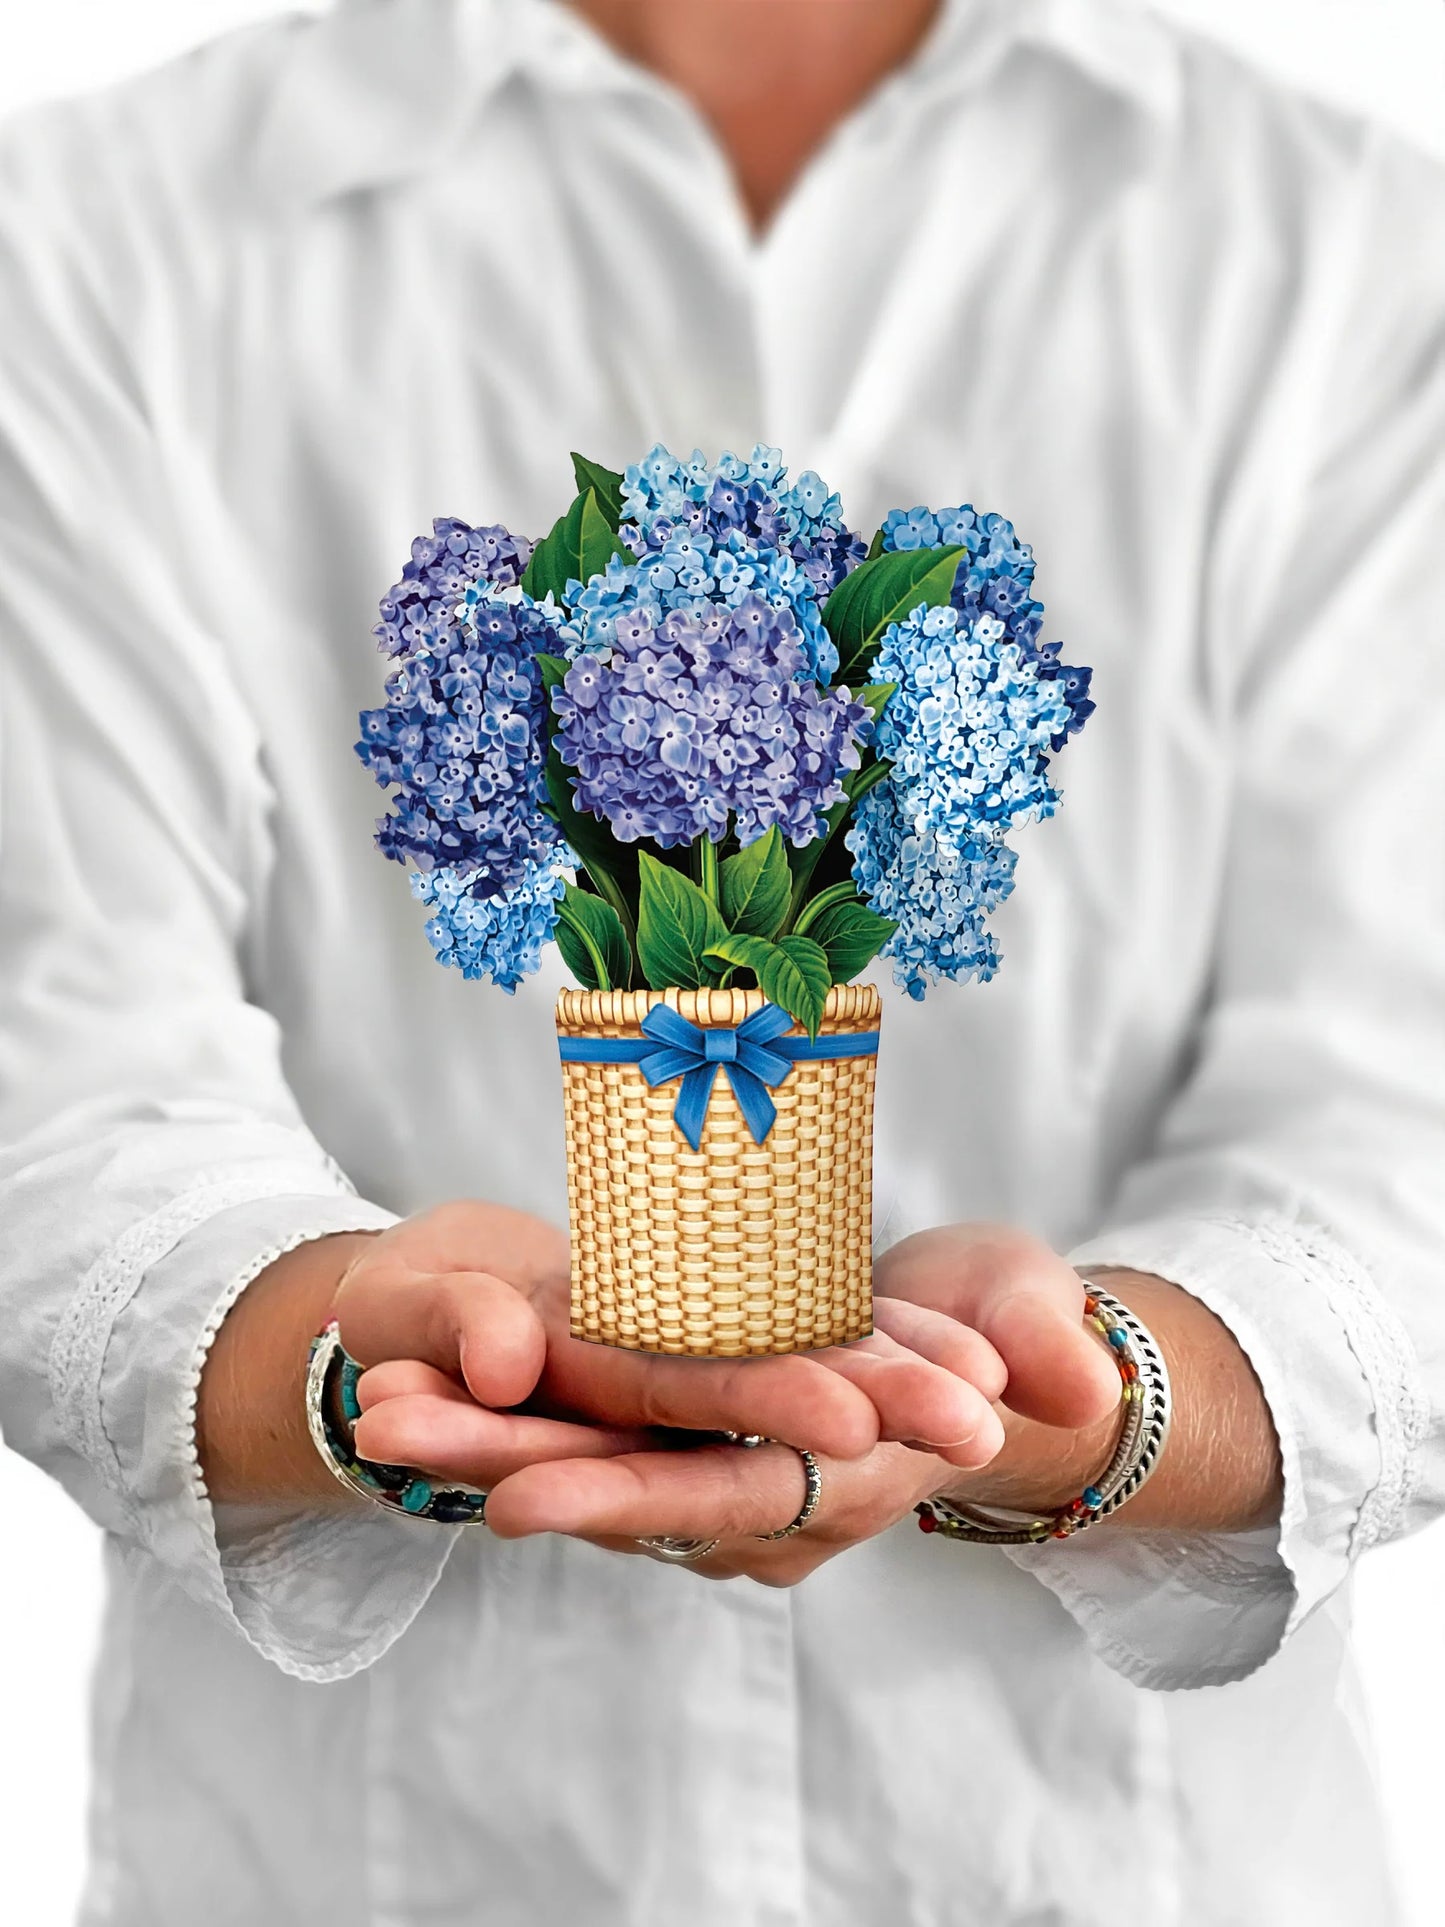 person holding Nantucket Hydrangeas pop-up bouquet in front of them.